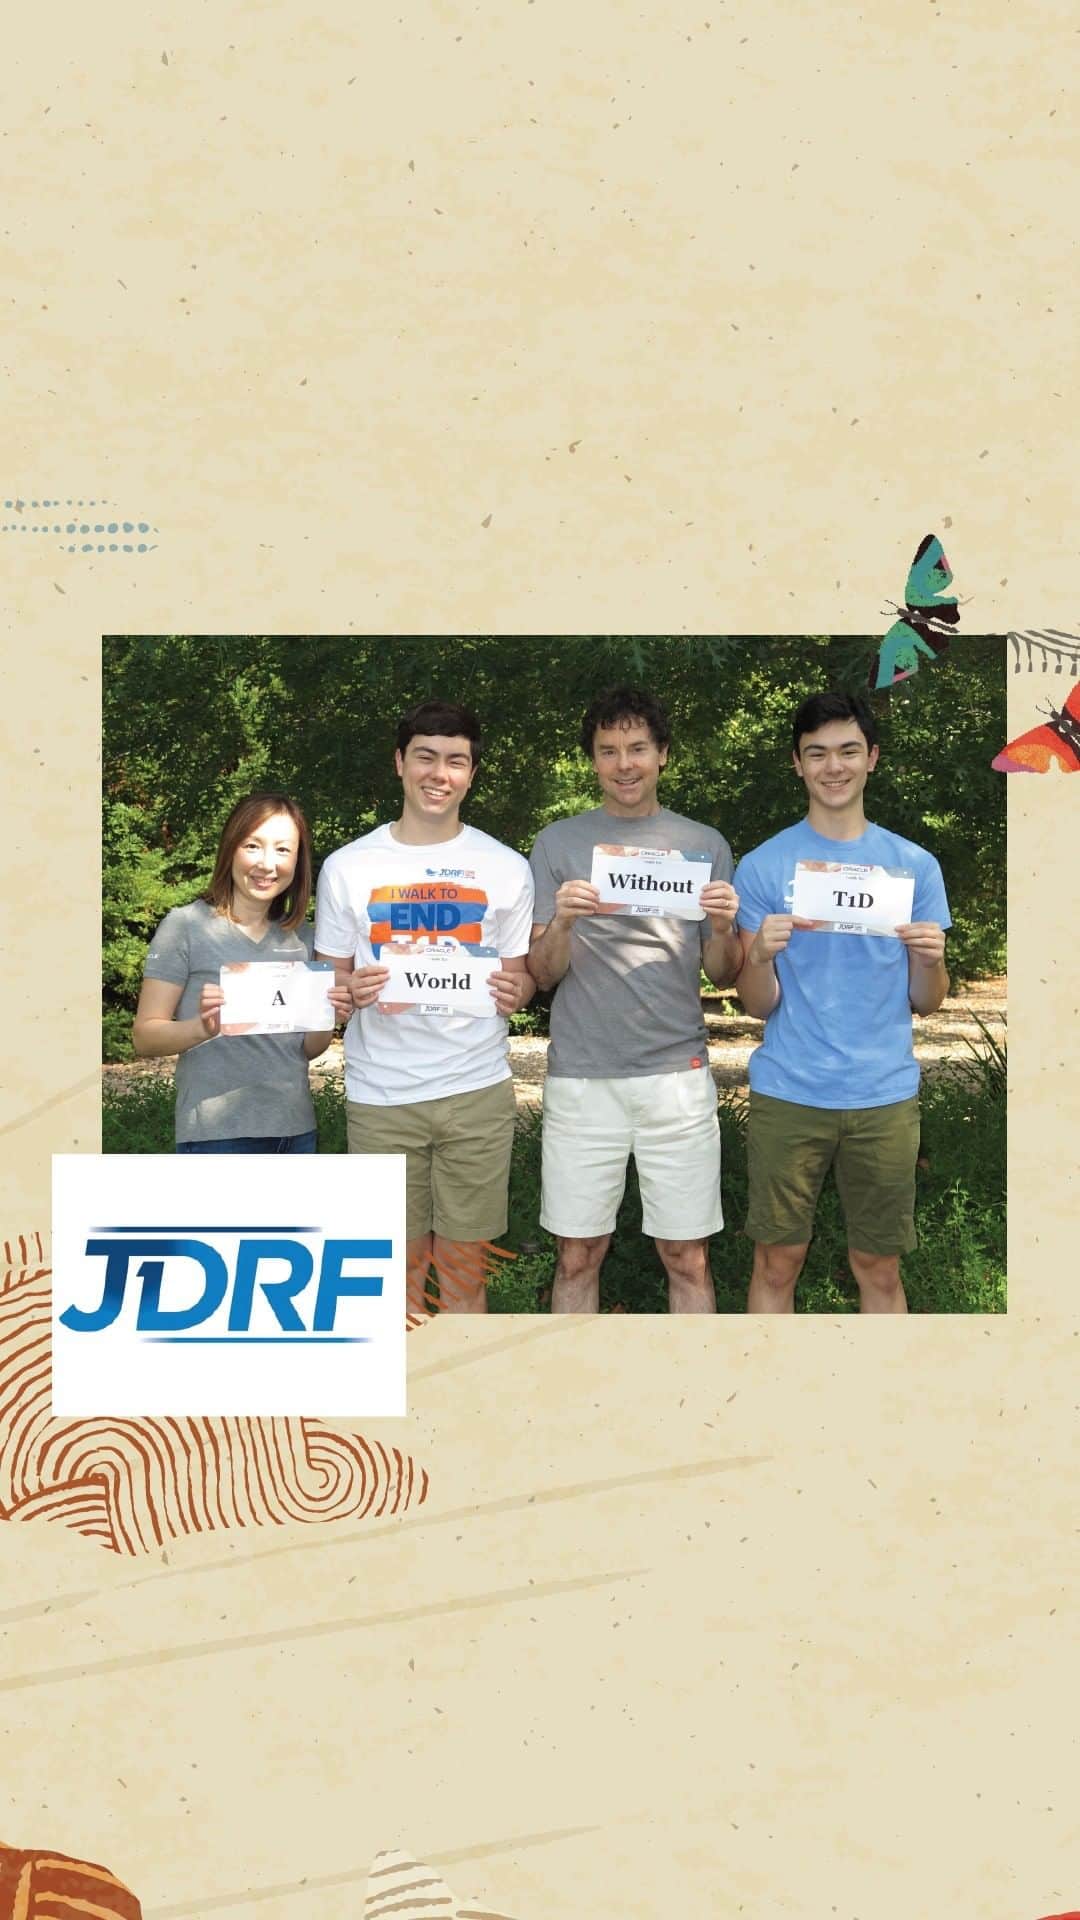 Oracle Corp. （オラクル）のインスタグラム：「Thank you @JDRFhq and Team Oracle! Together we logged 12,000 miles and raised a quarter of a million dollars for Type 1 Diabetes research. #WorldDiabetesDay」